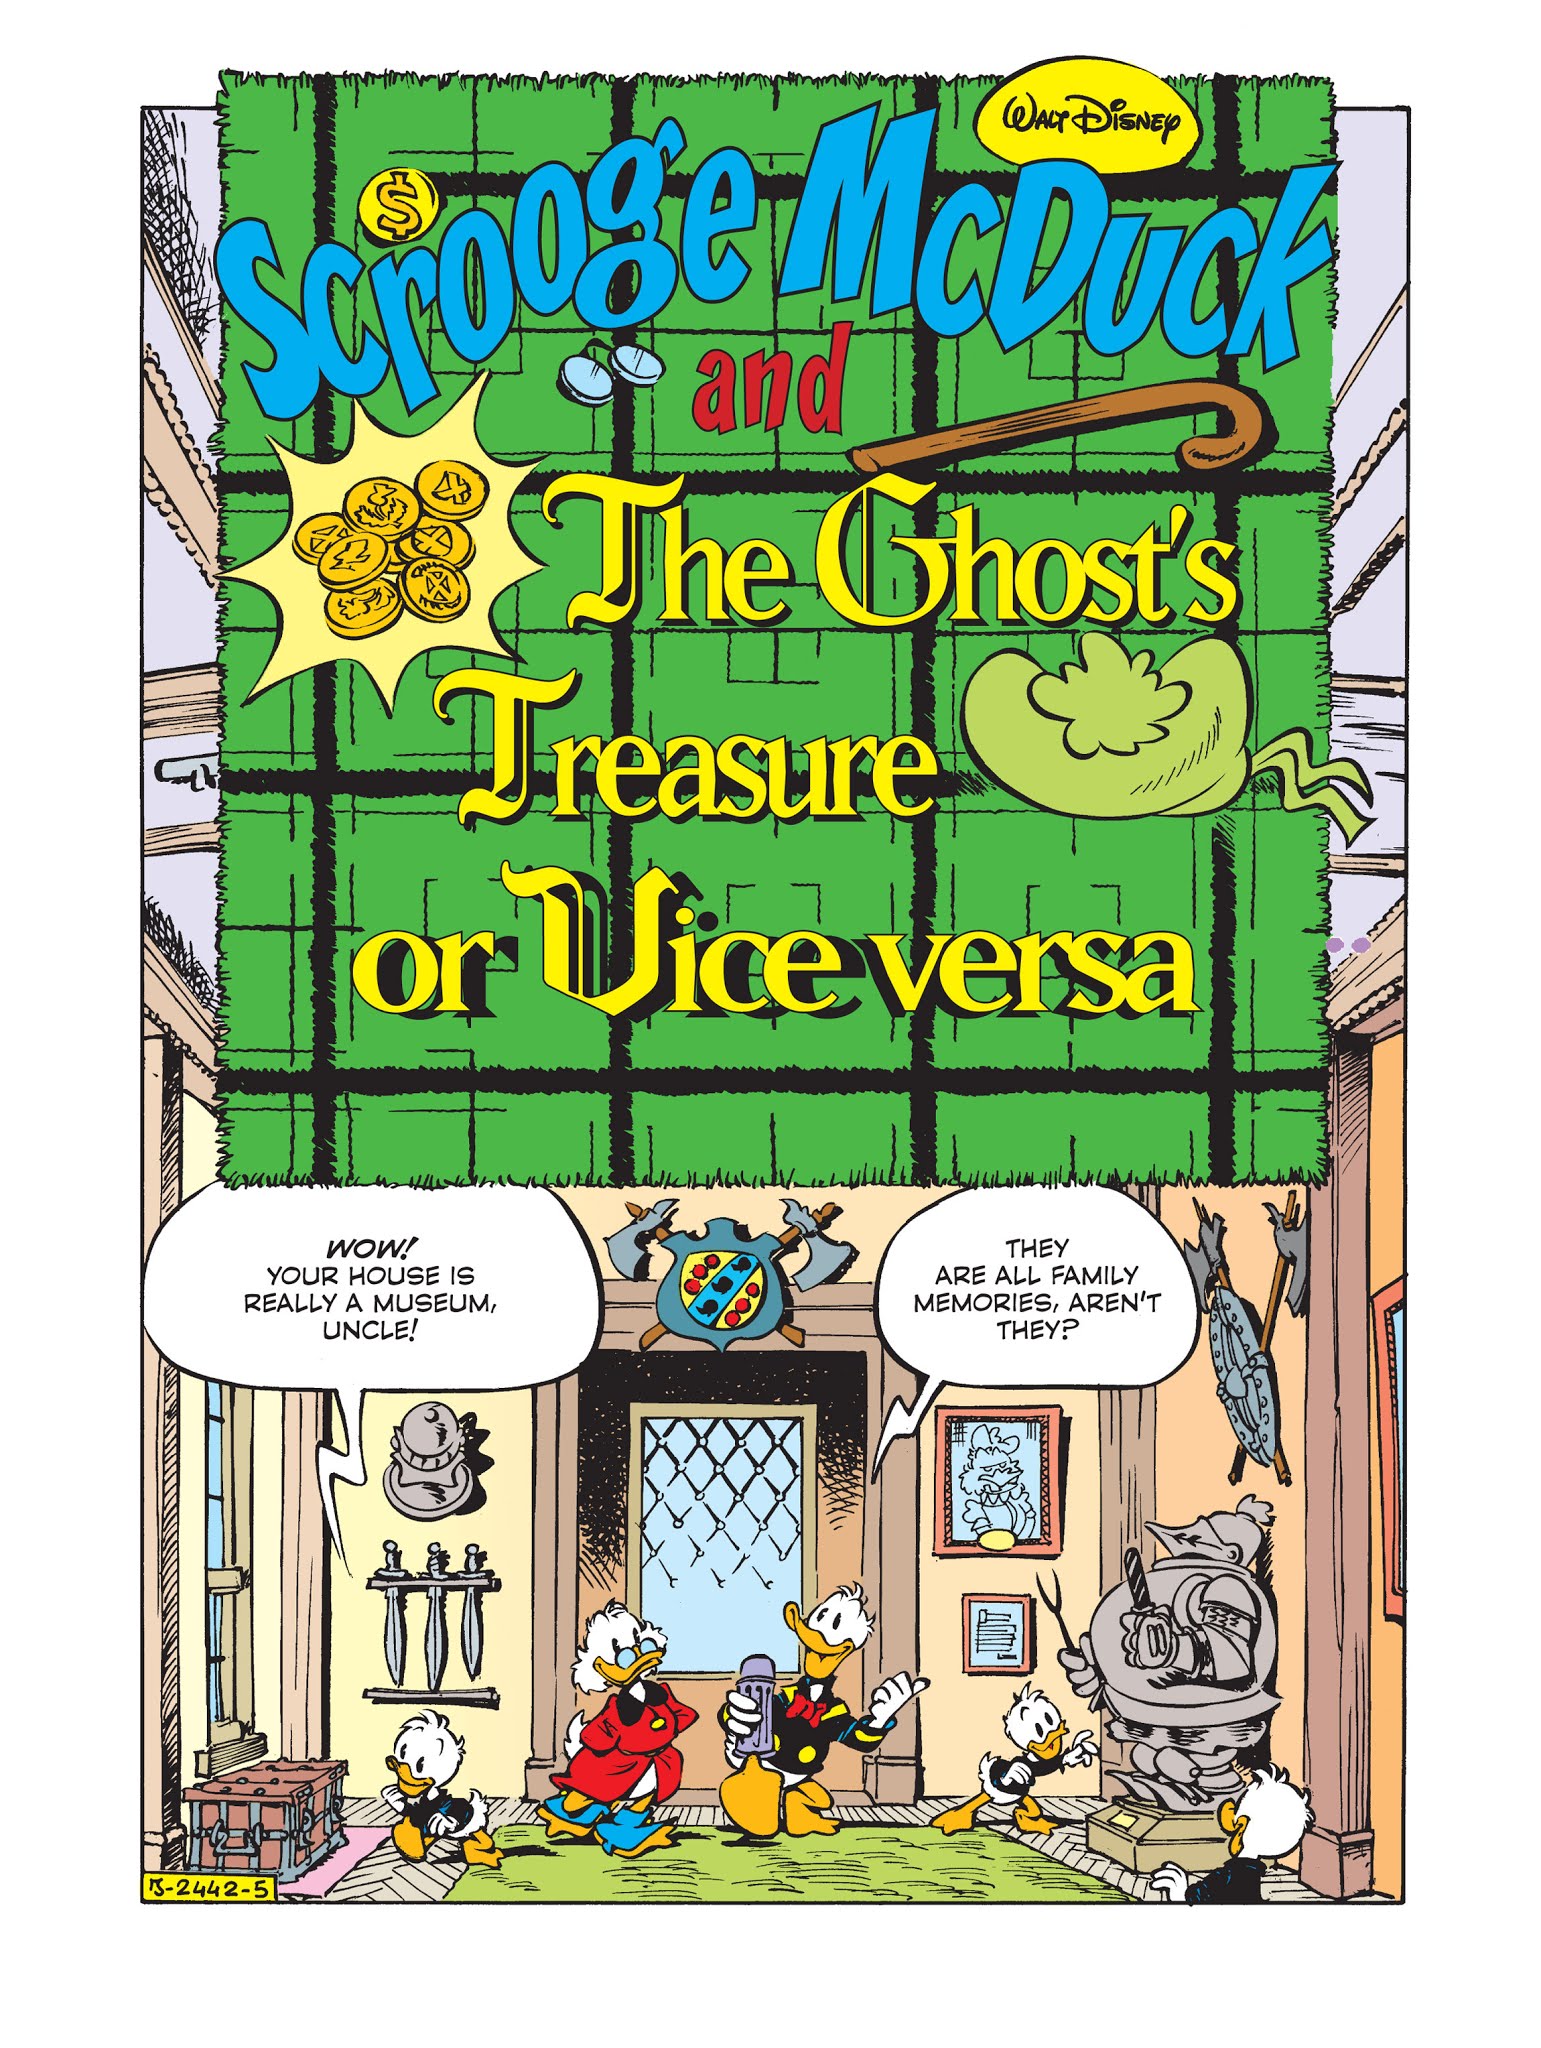 Read online Scrooge McDuck and the Ghost's Treasure (or Vice Versa) comic -  Issue # Full - 2